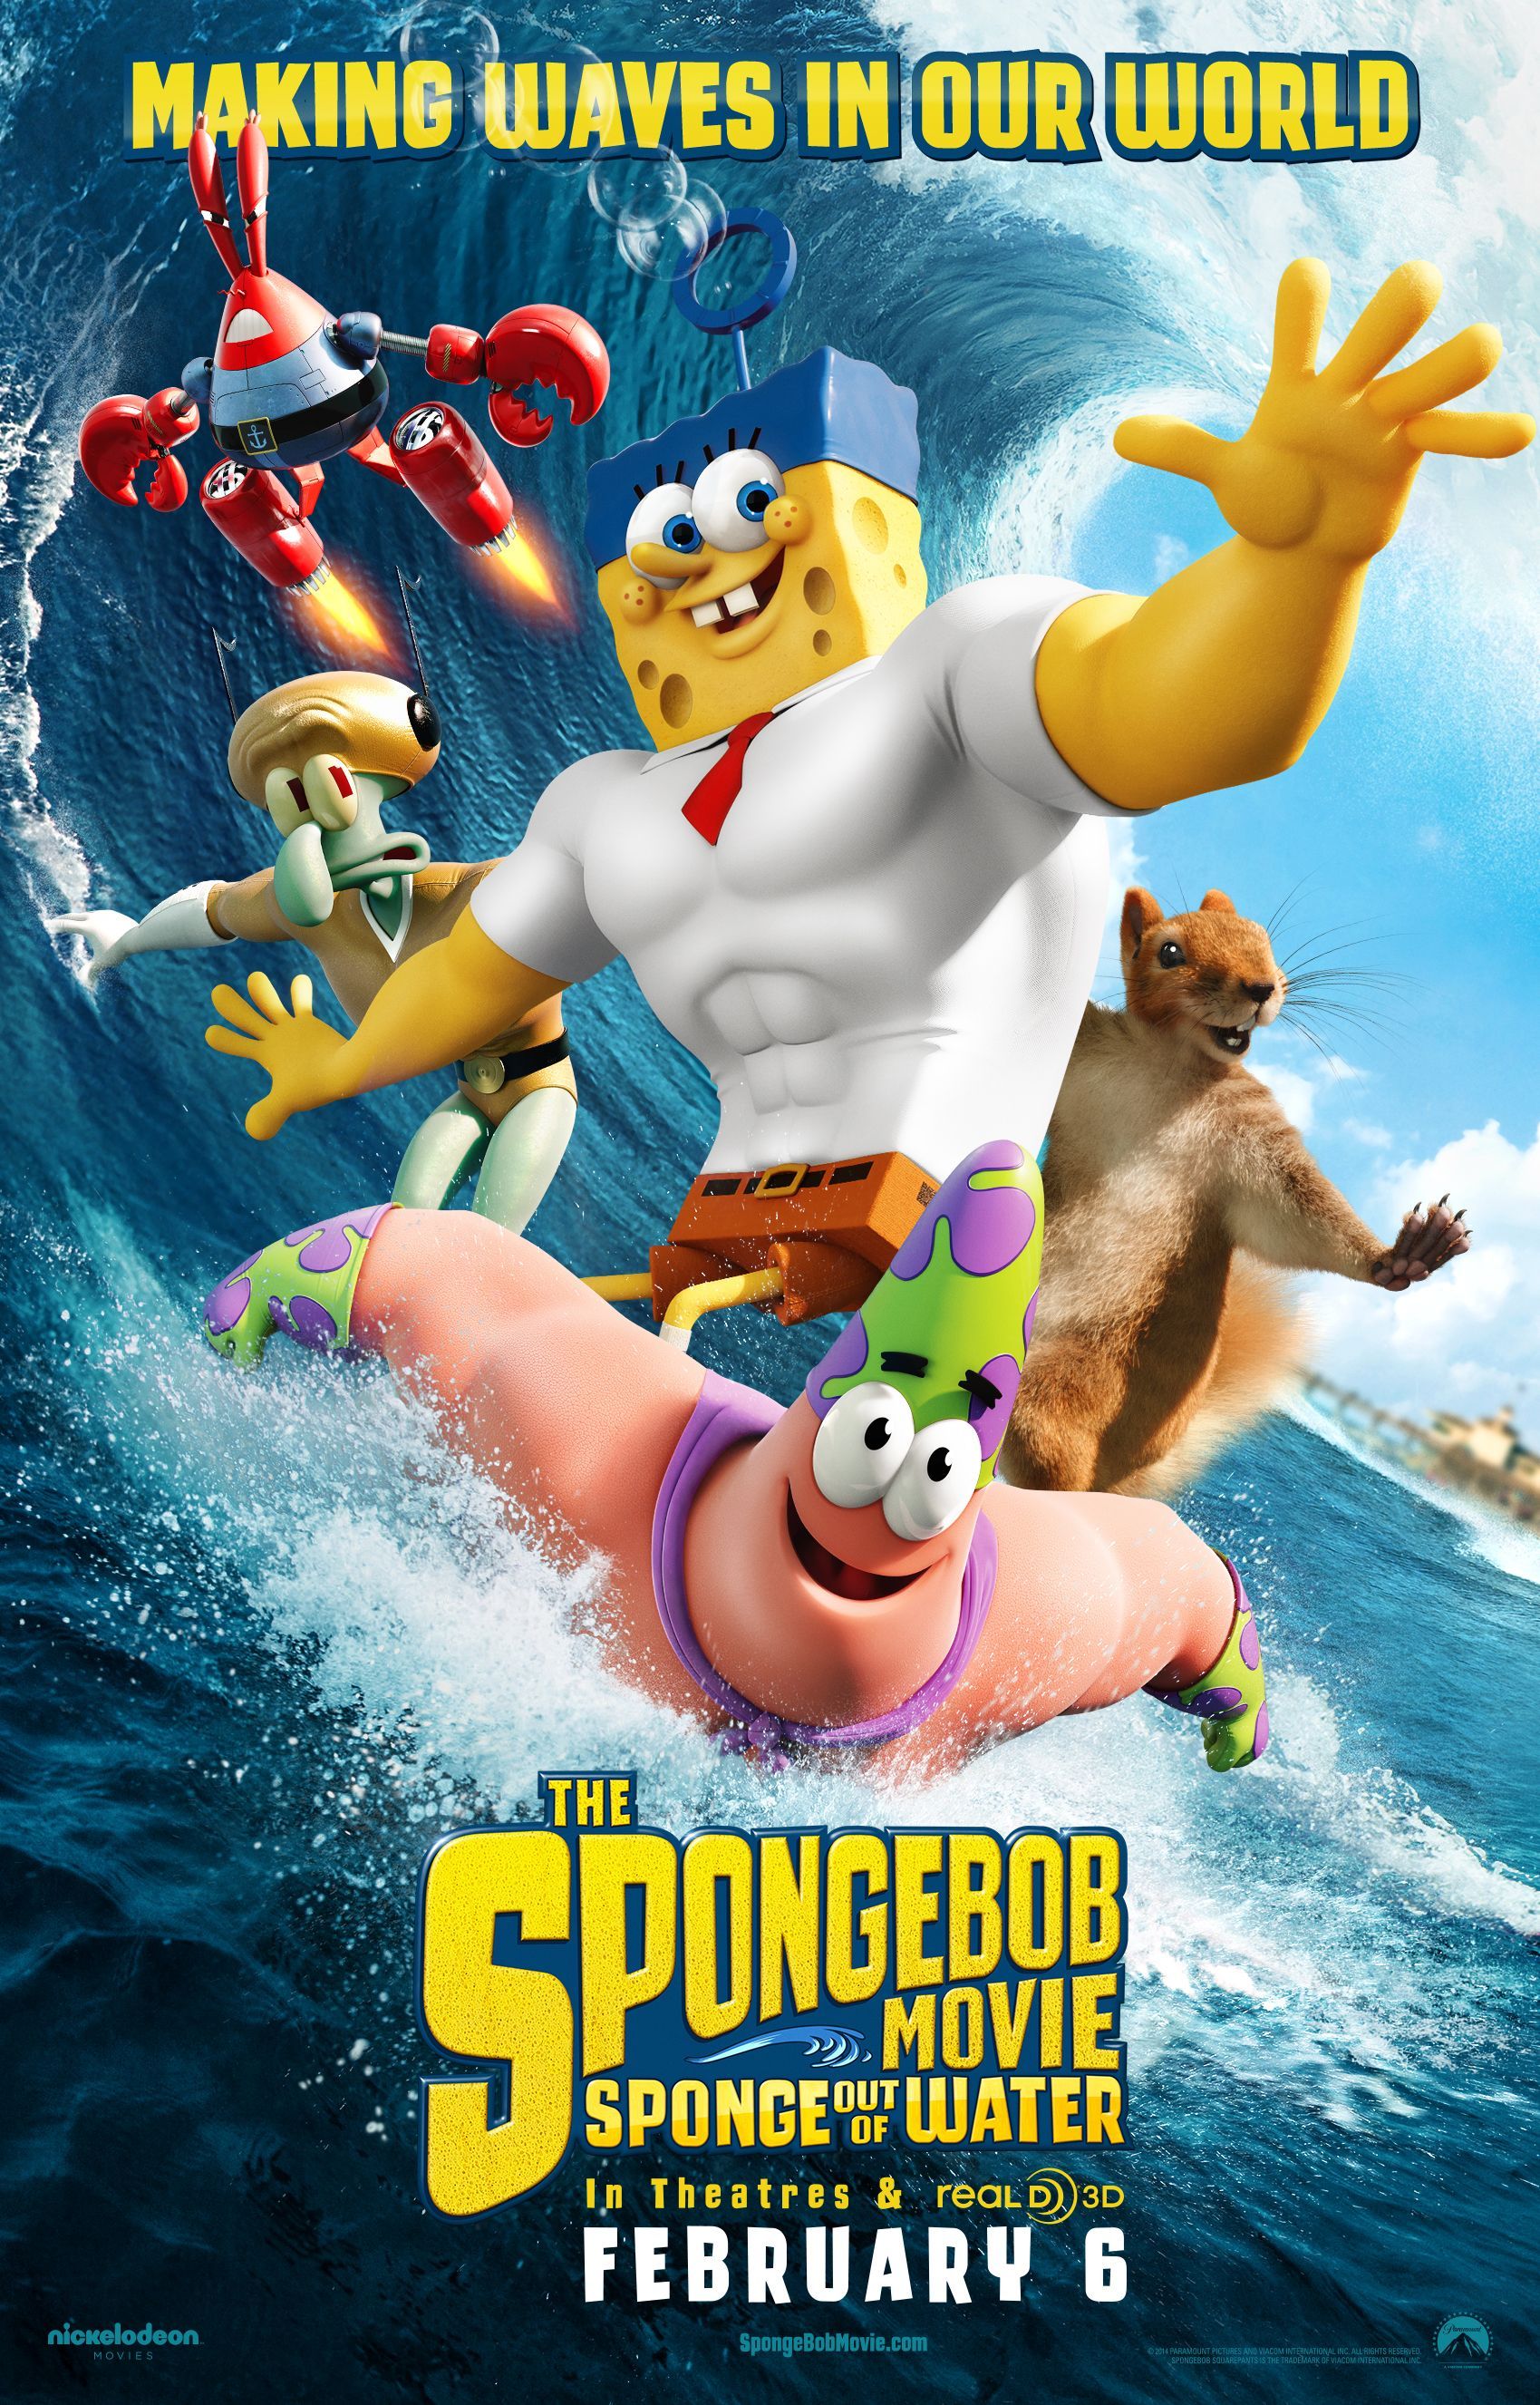 spongebob-movie-out-of-water-official-poster.jpg